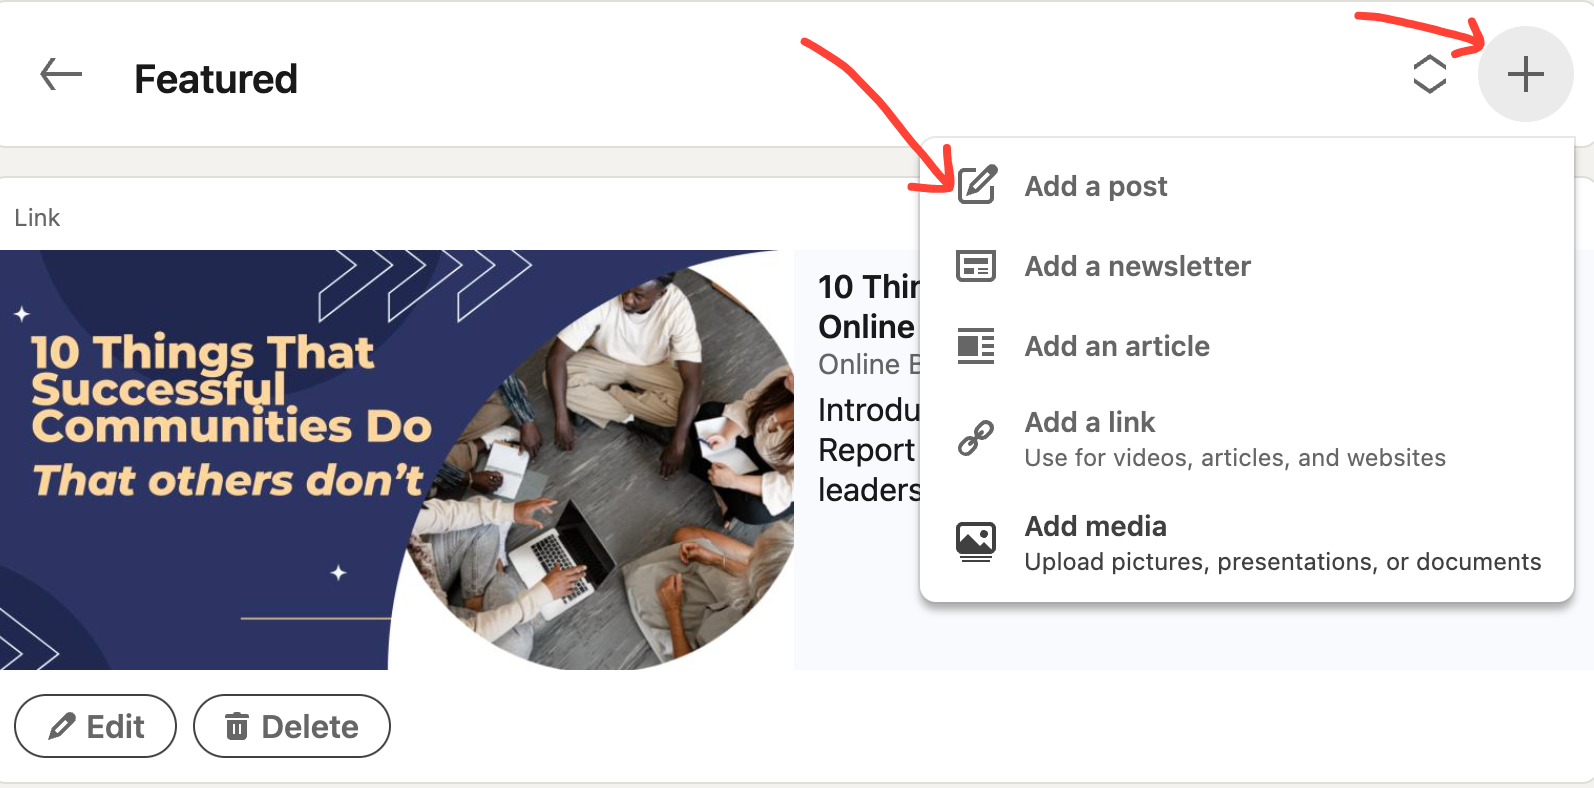 Image is a screenshot showing how to add in items to your LinkedIn Profile Featured section